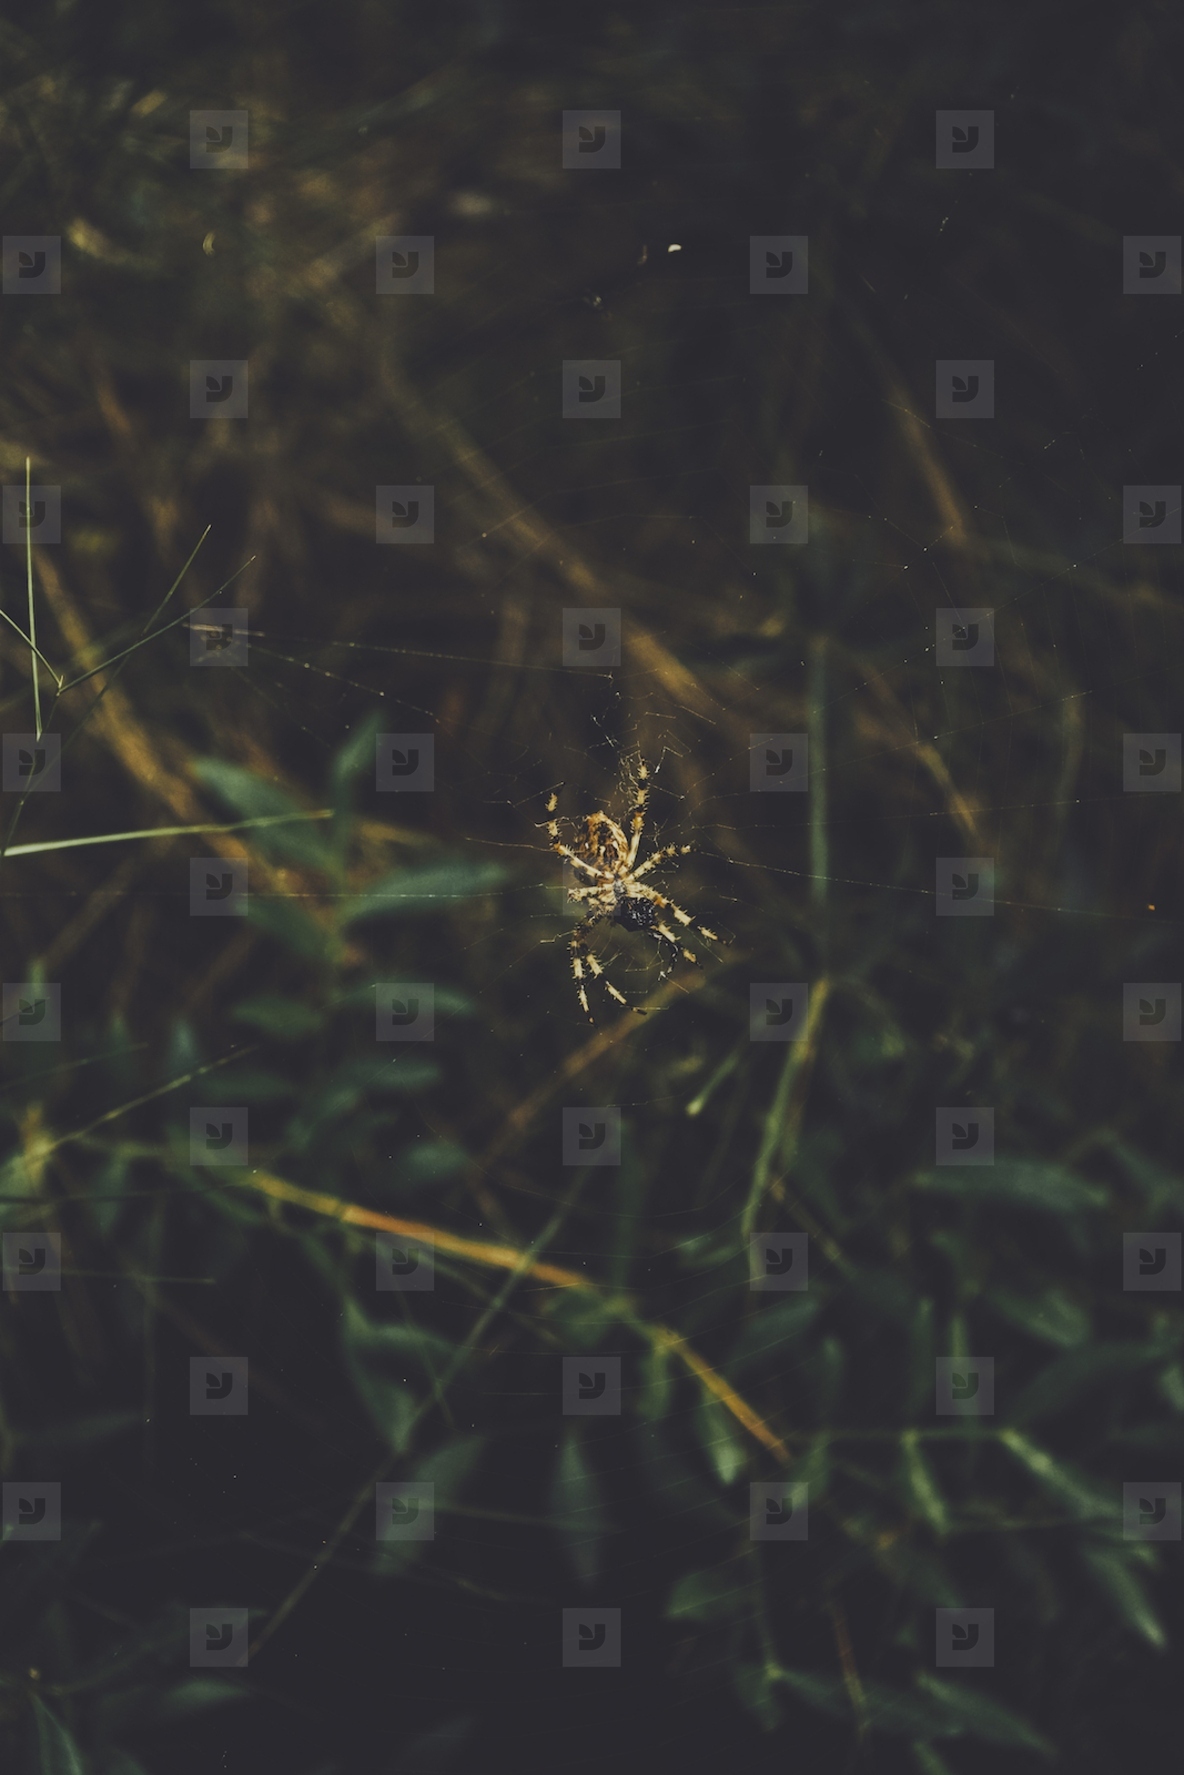 Big yellow spider in her spider web in a forest